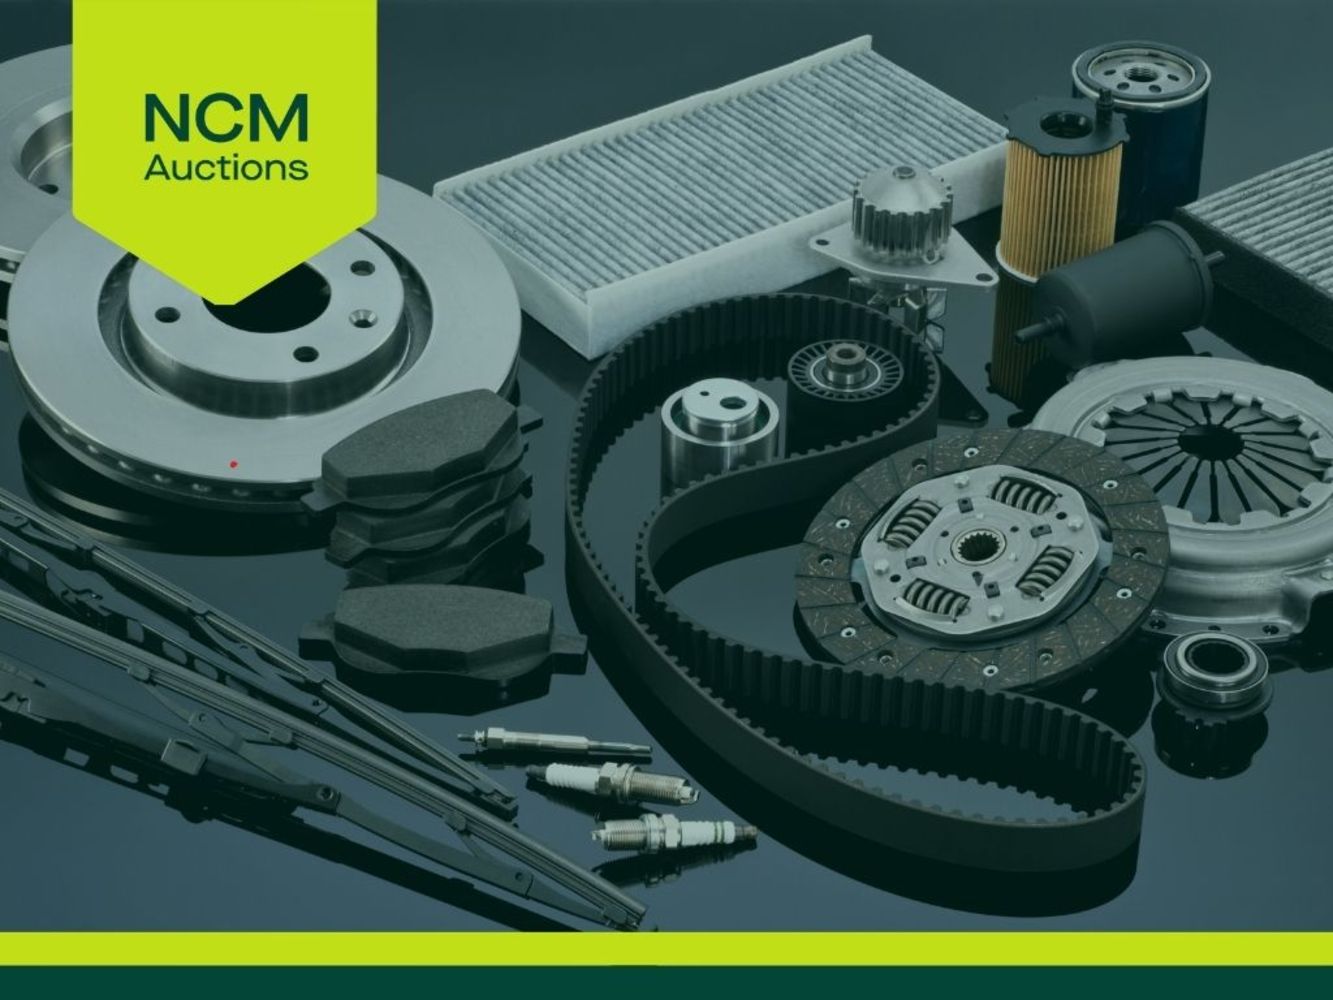 Direct From International Machinery Manufacturer DEM Group - To Include Machinery Parts, Spares, And Much More